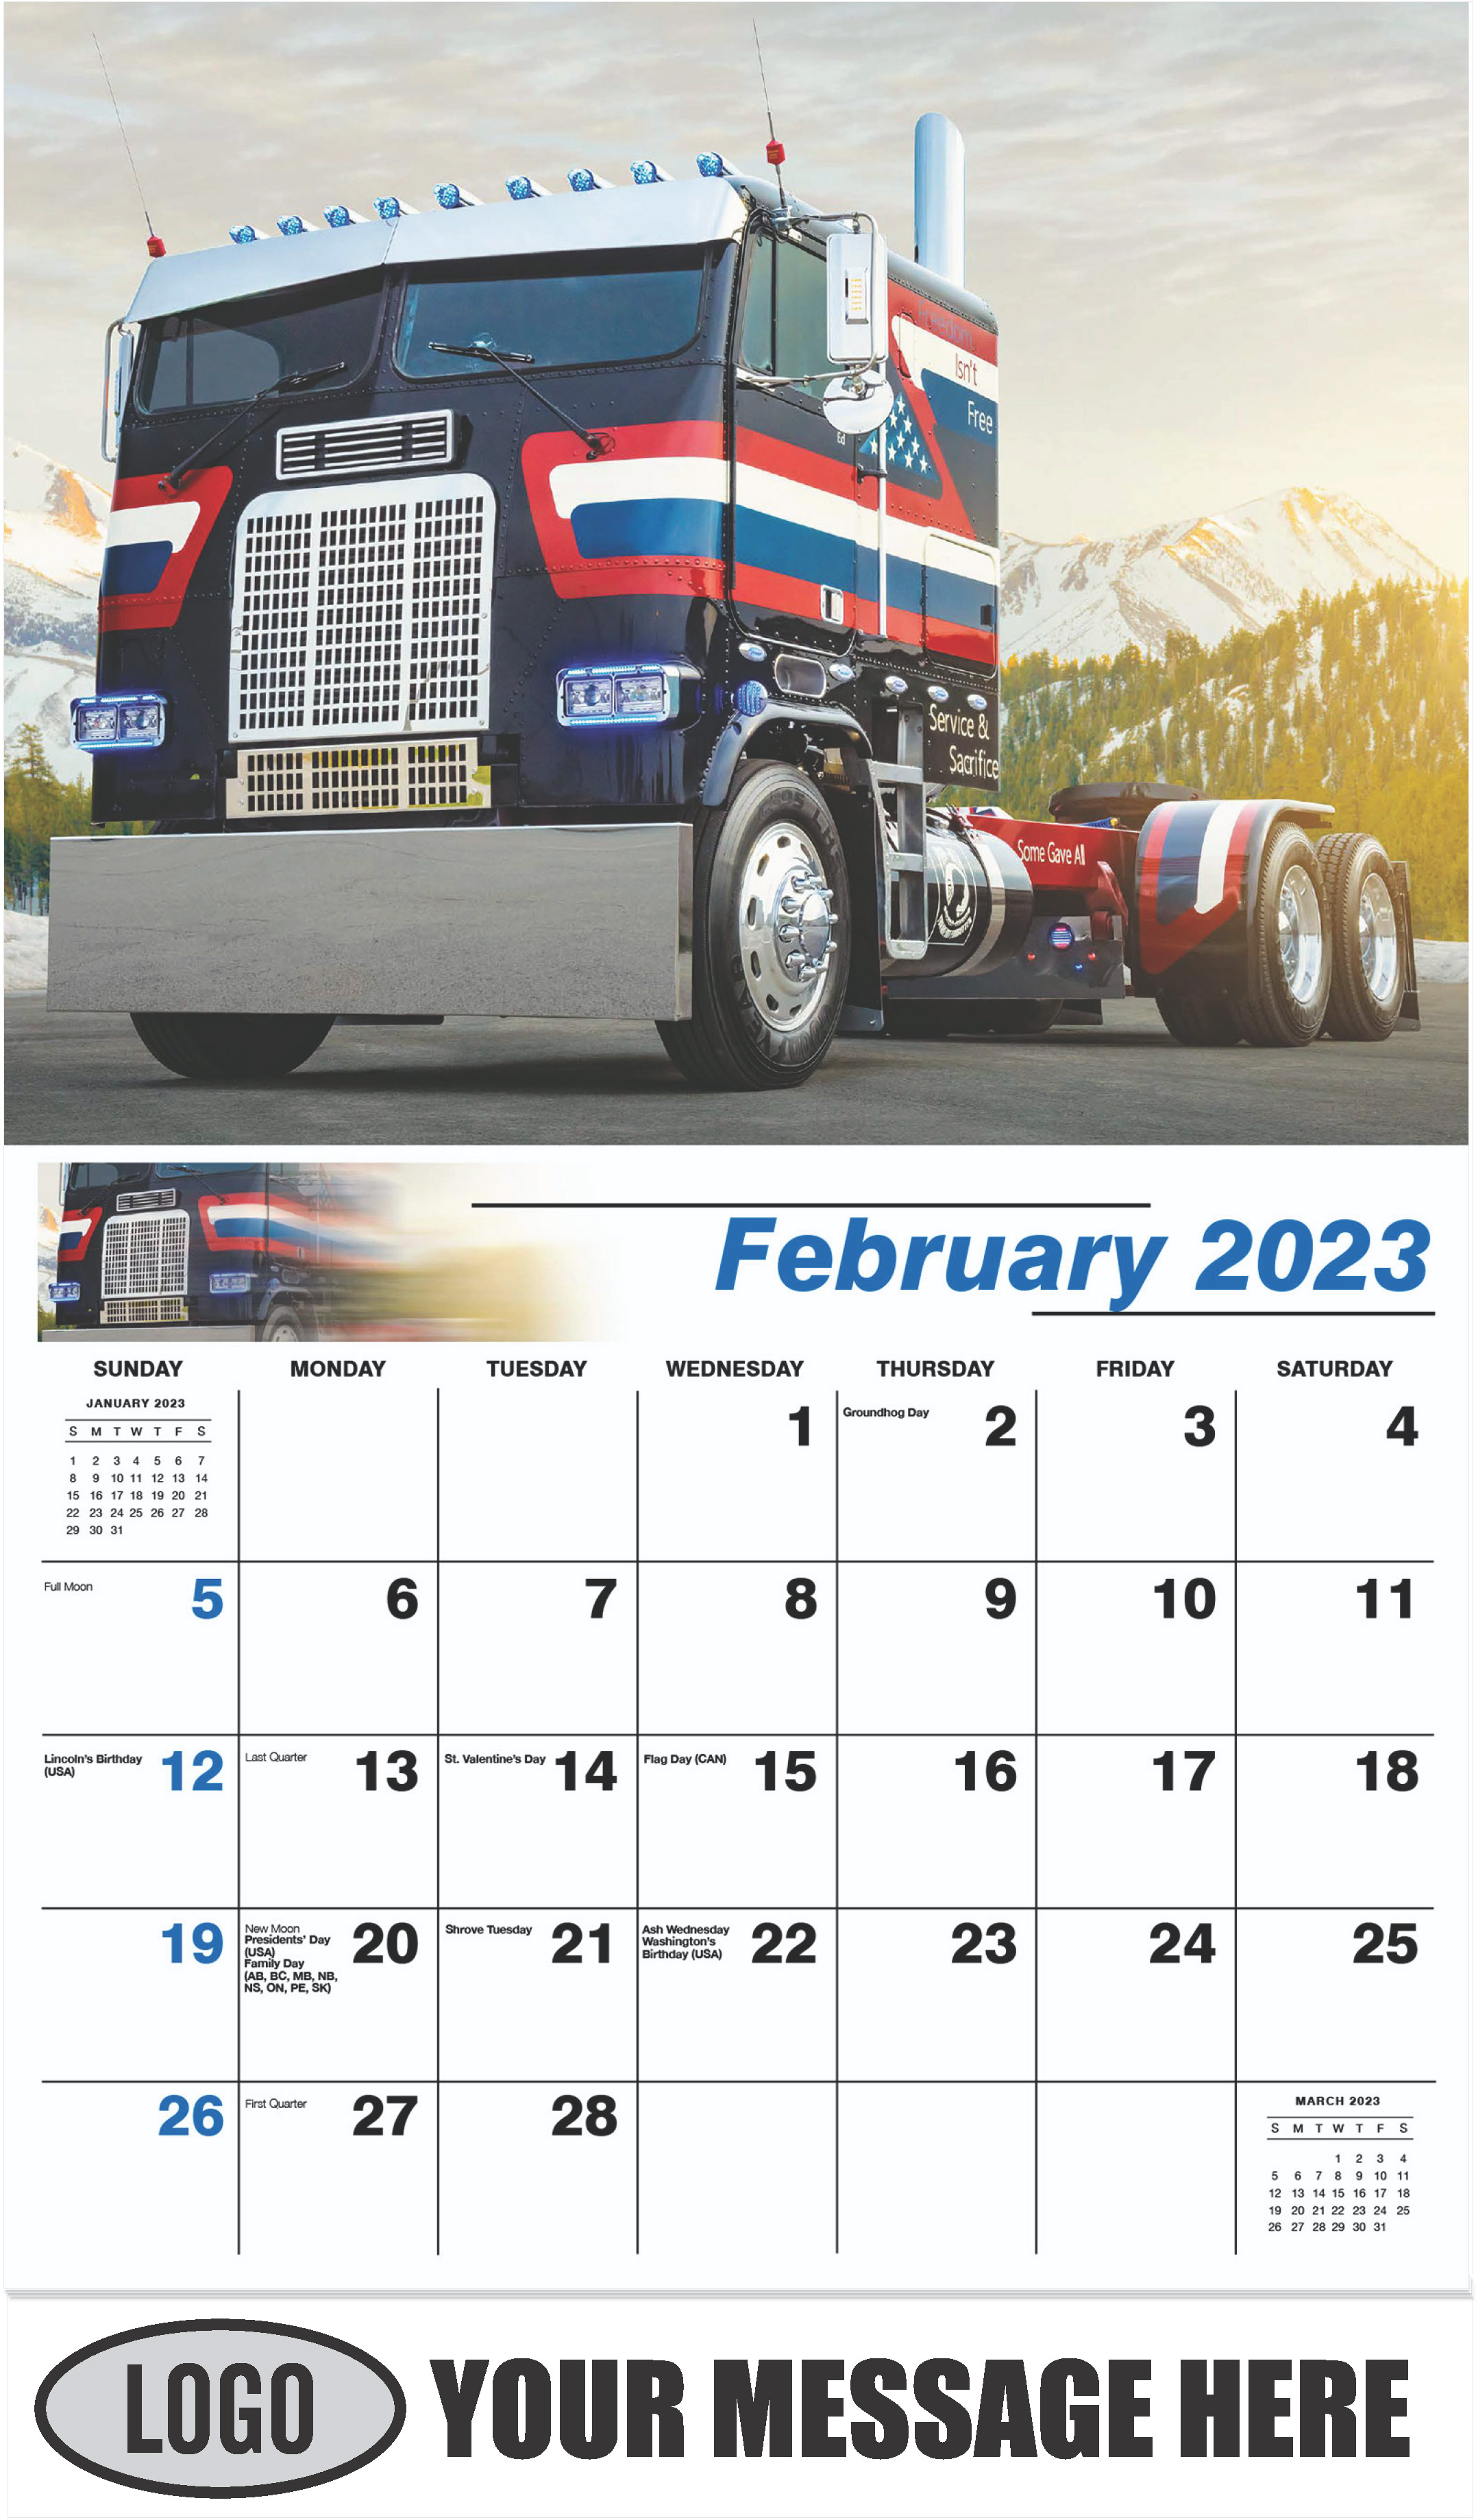 1988 Freightliner - February - Kings of the Road 2023 Promotional Calendar